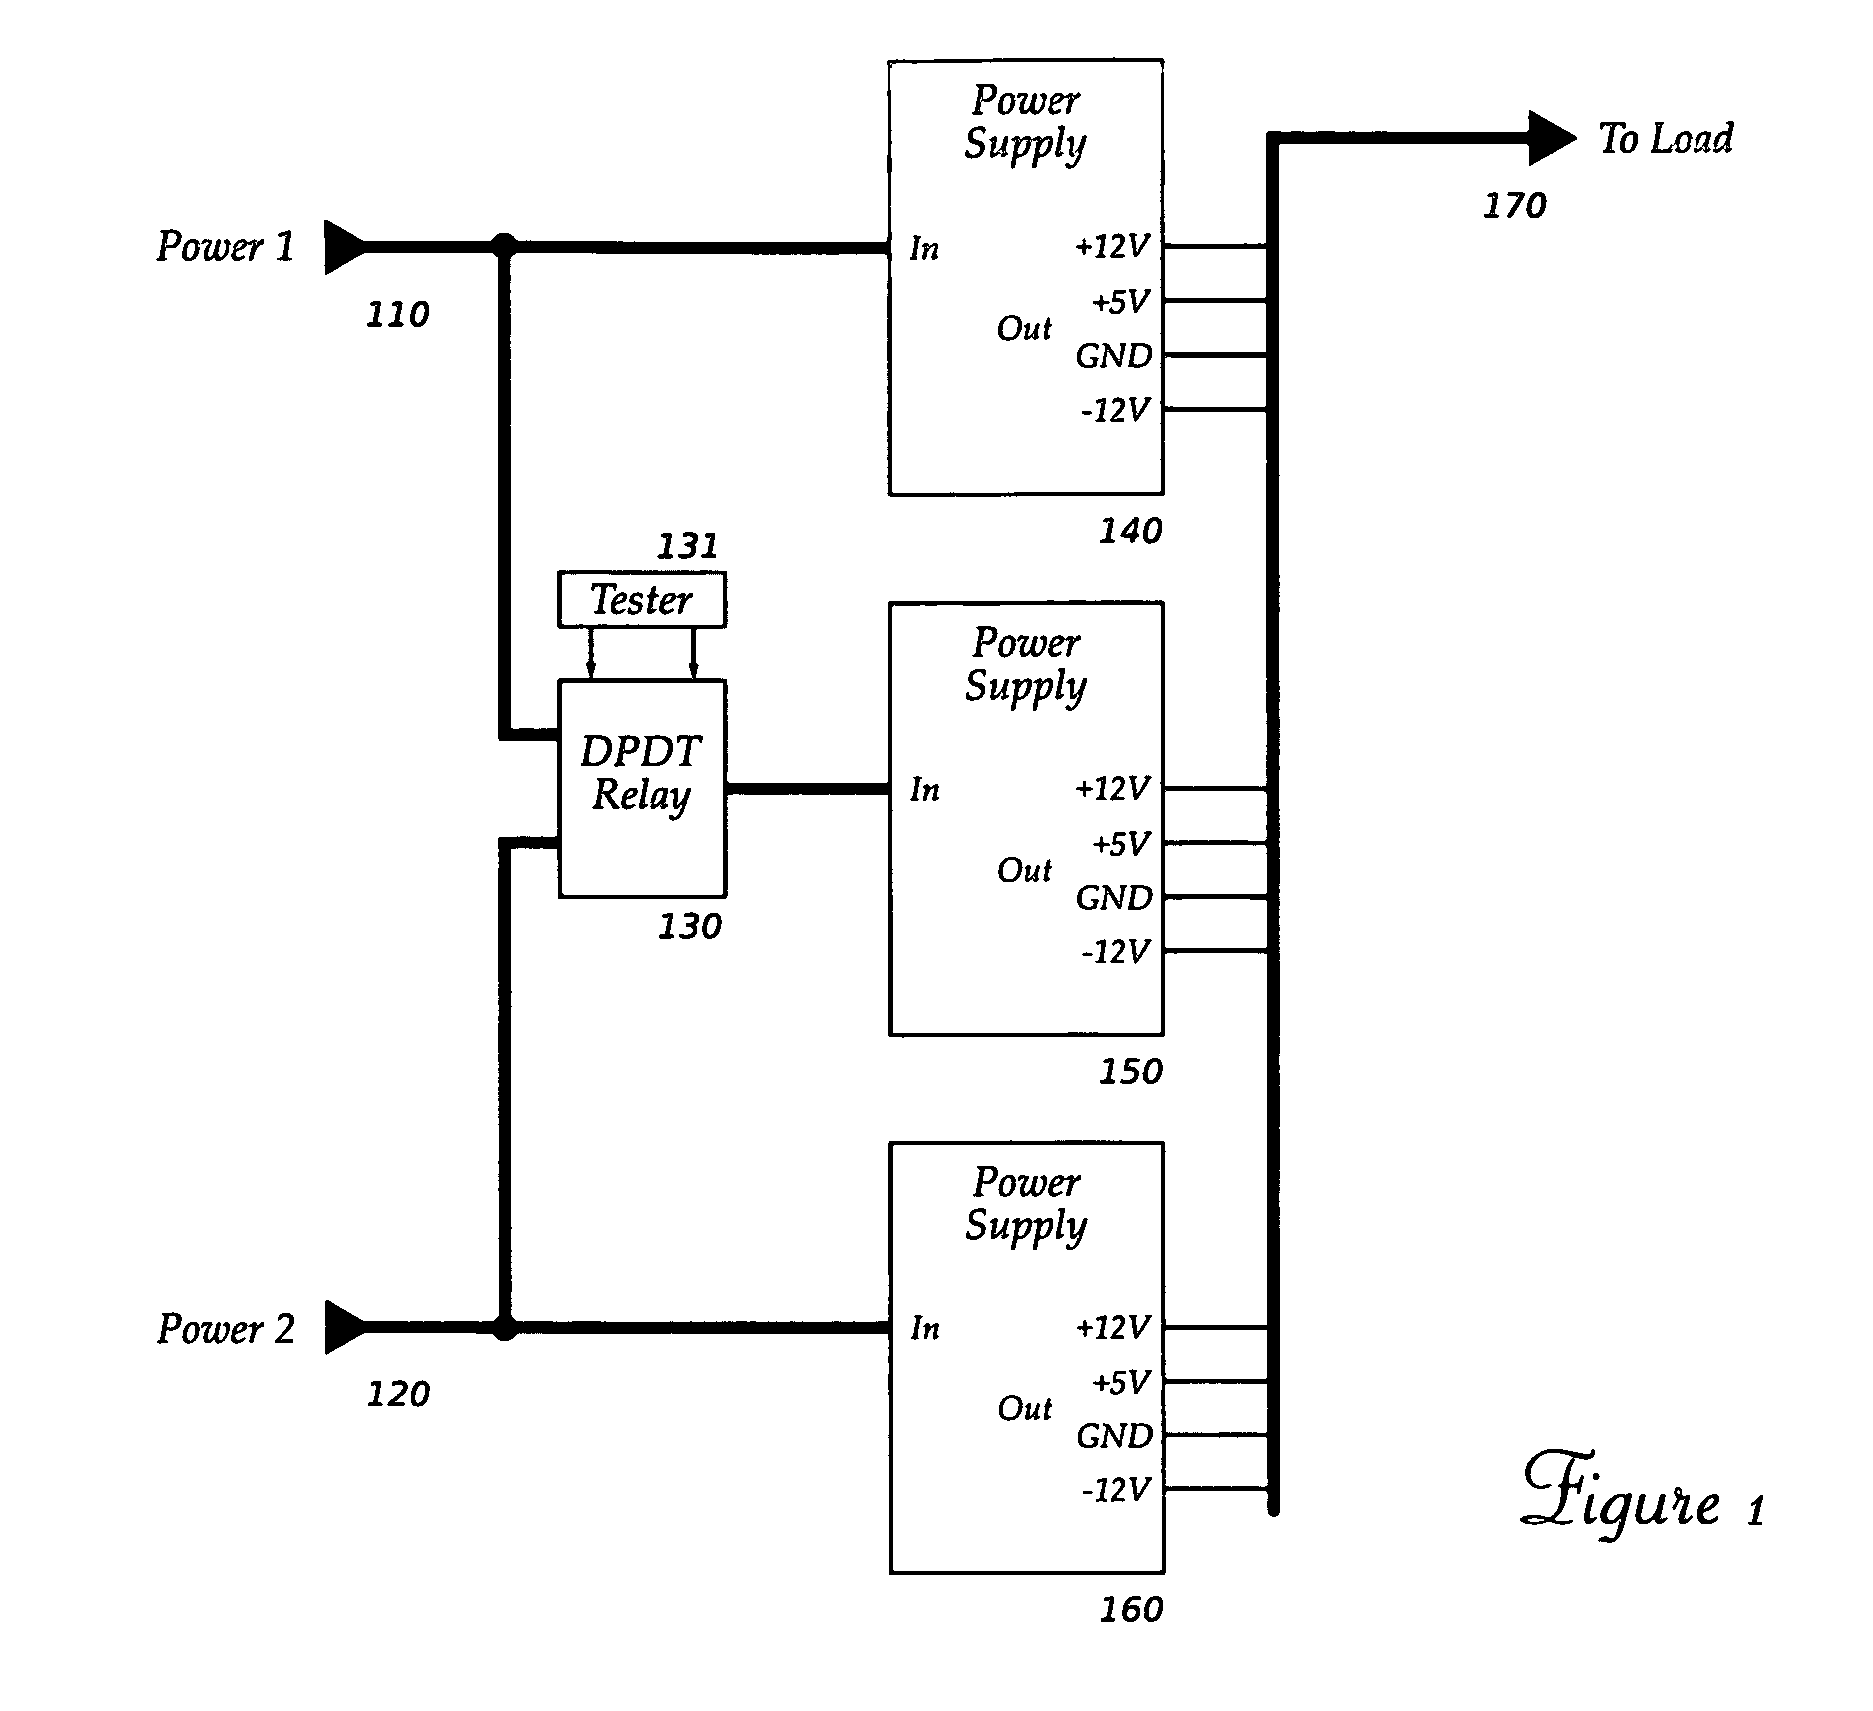 Redundant power system with no latent single failure point